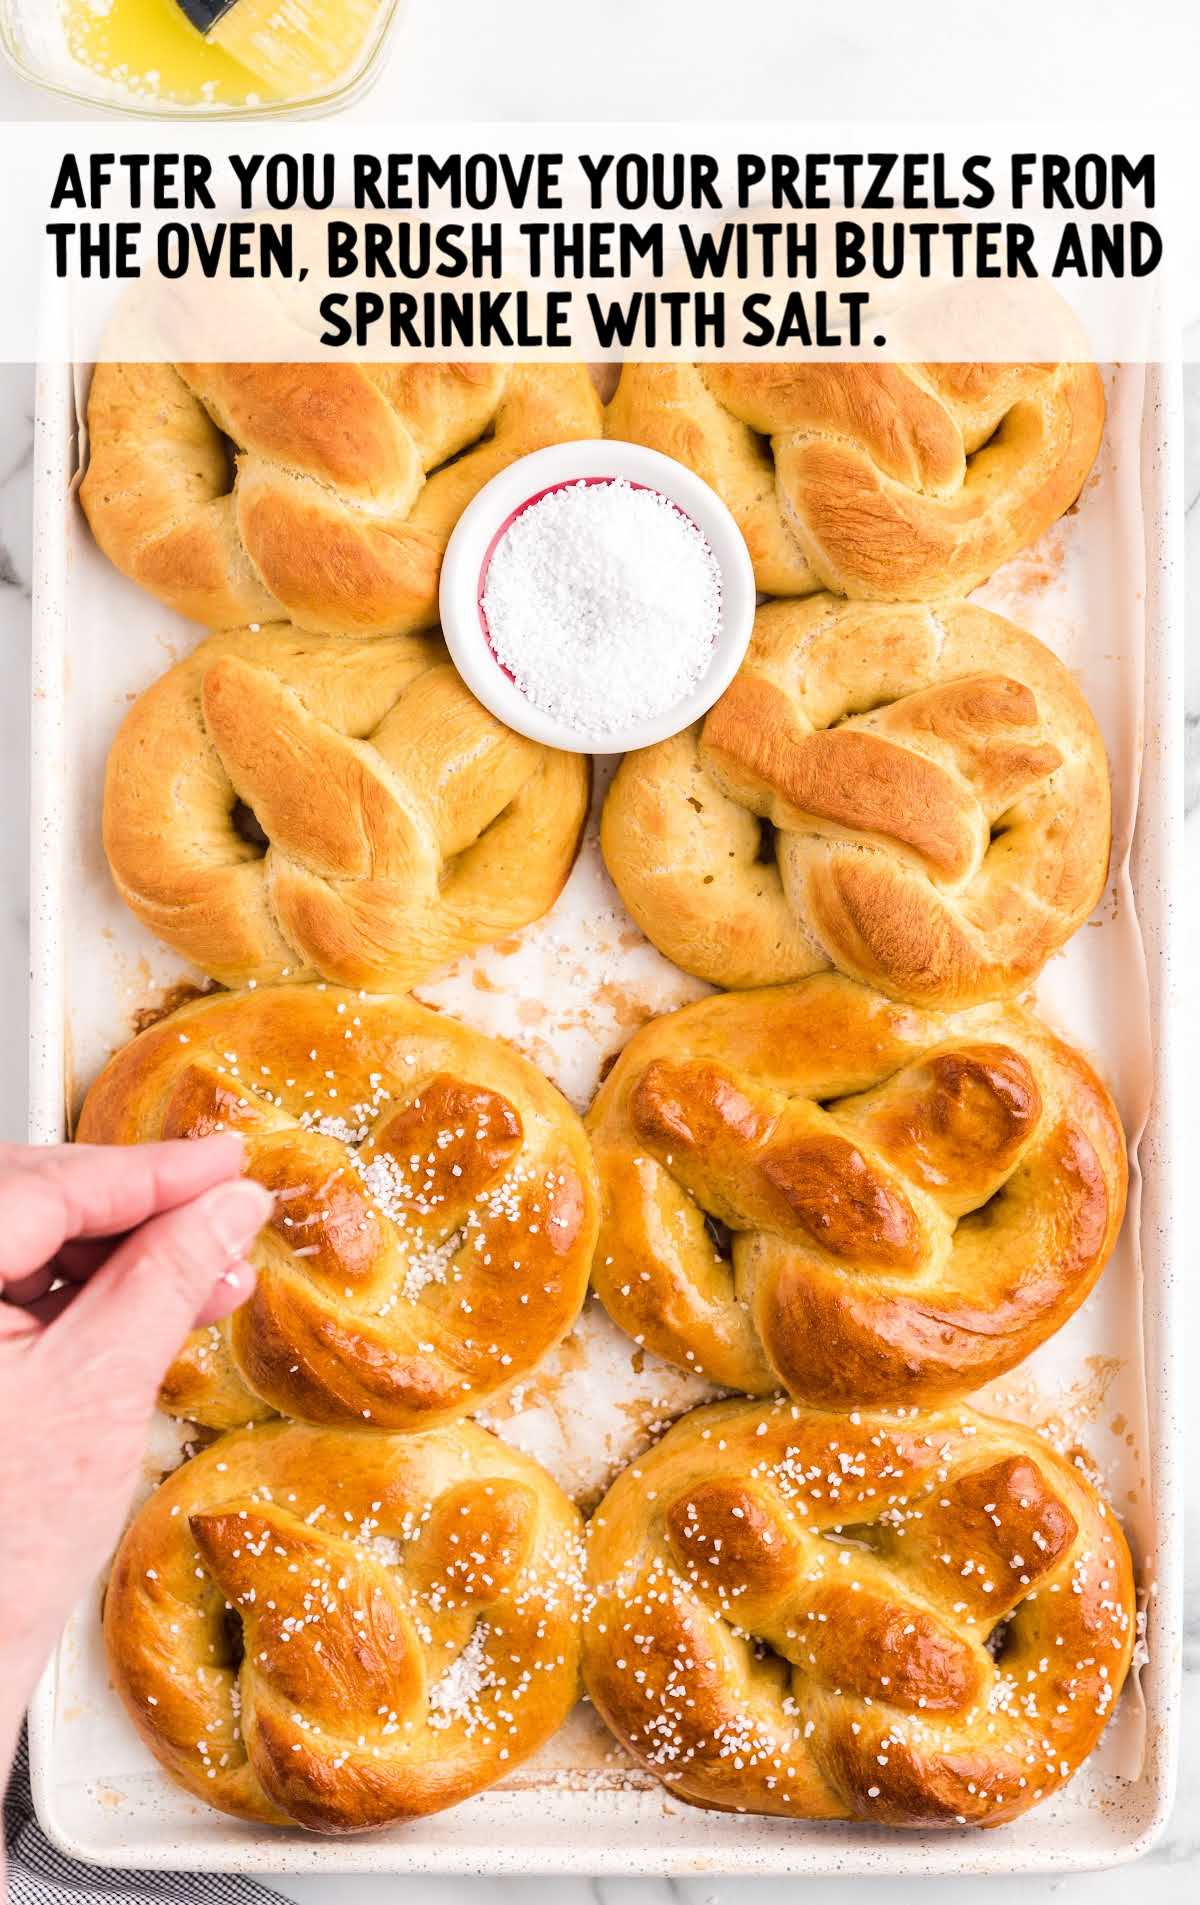 brush pretzel with butter and sprinkle with salt